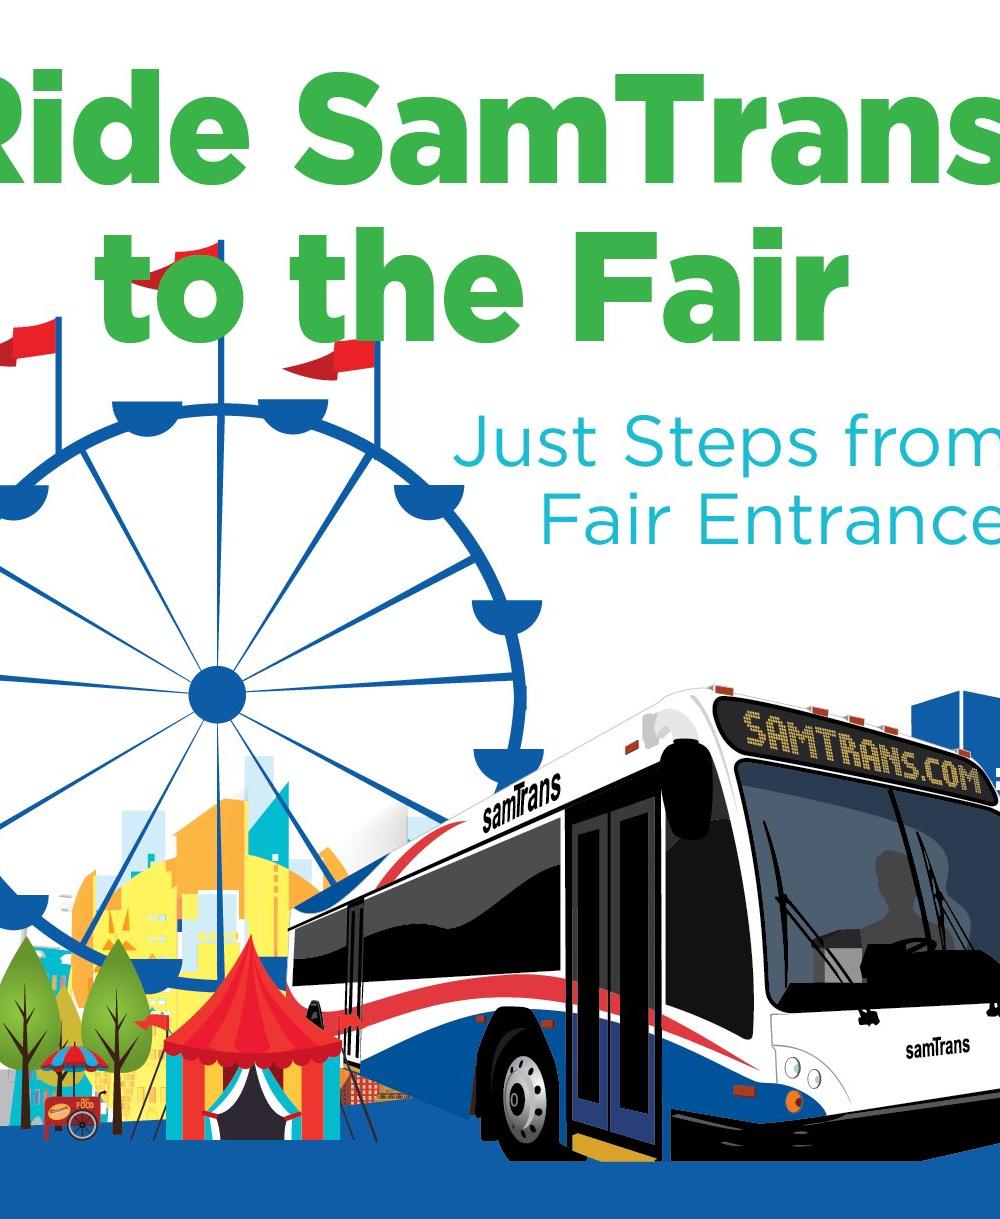 Ride SamTrans to the Fair